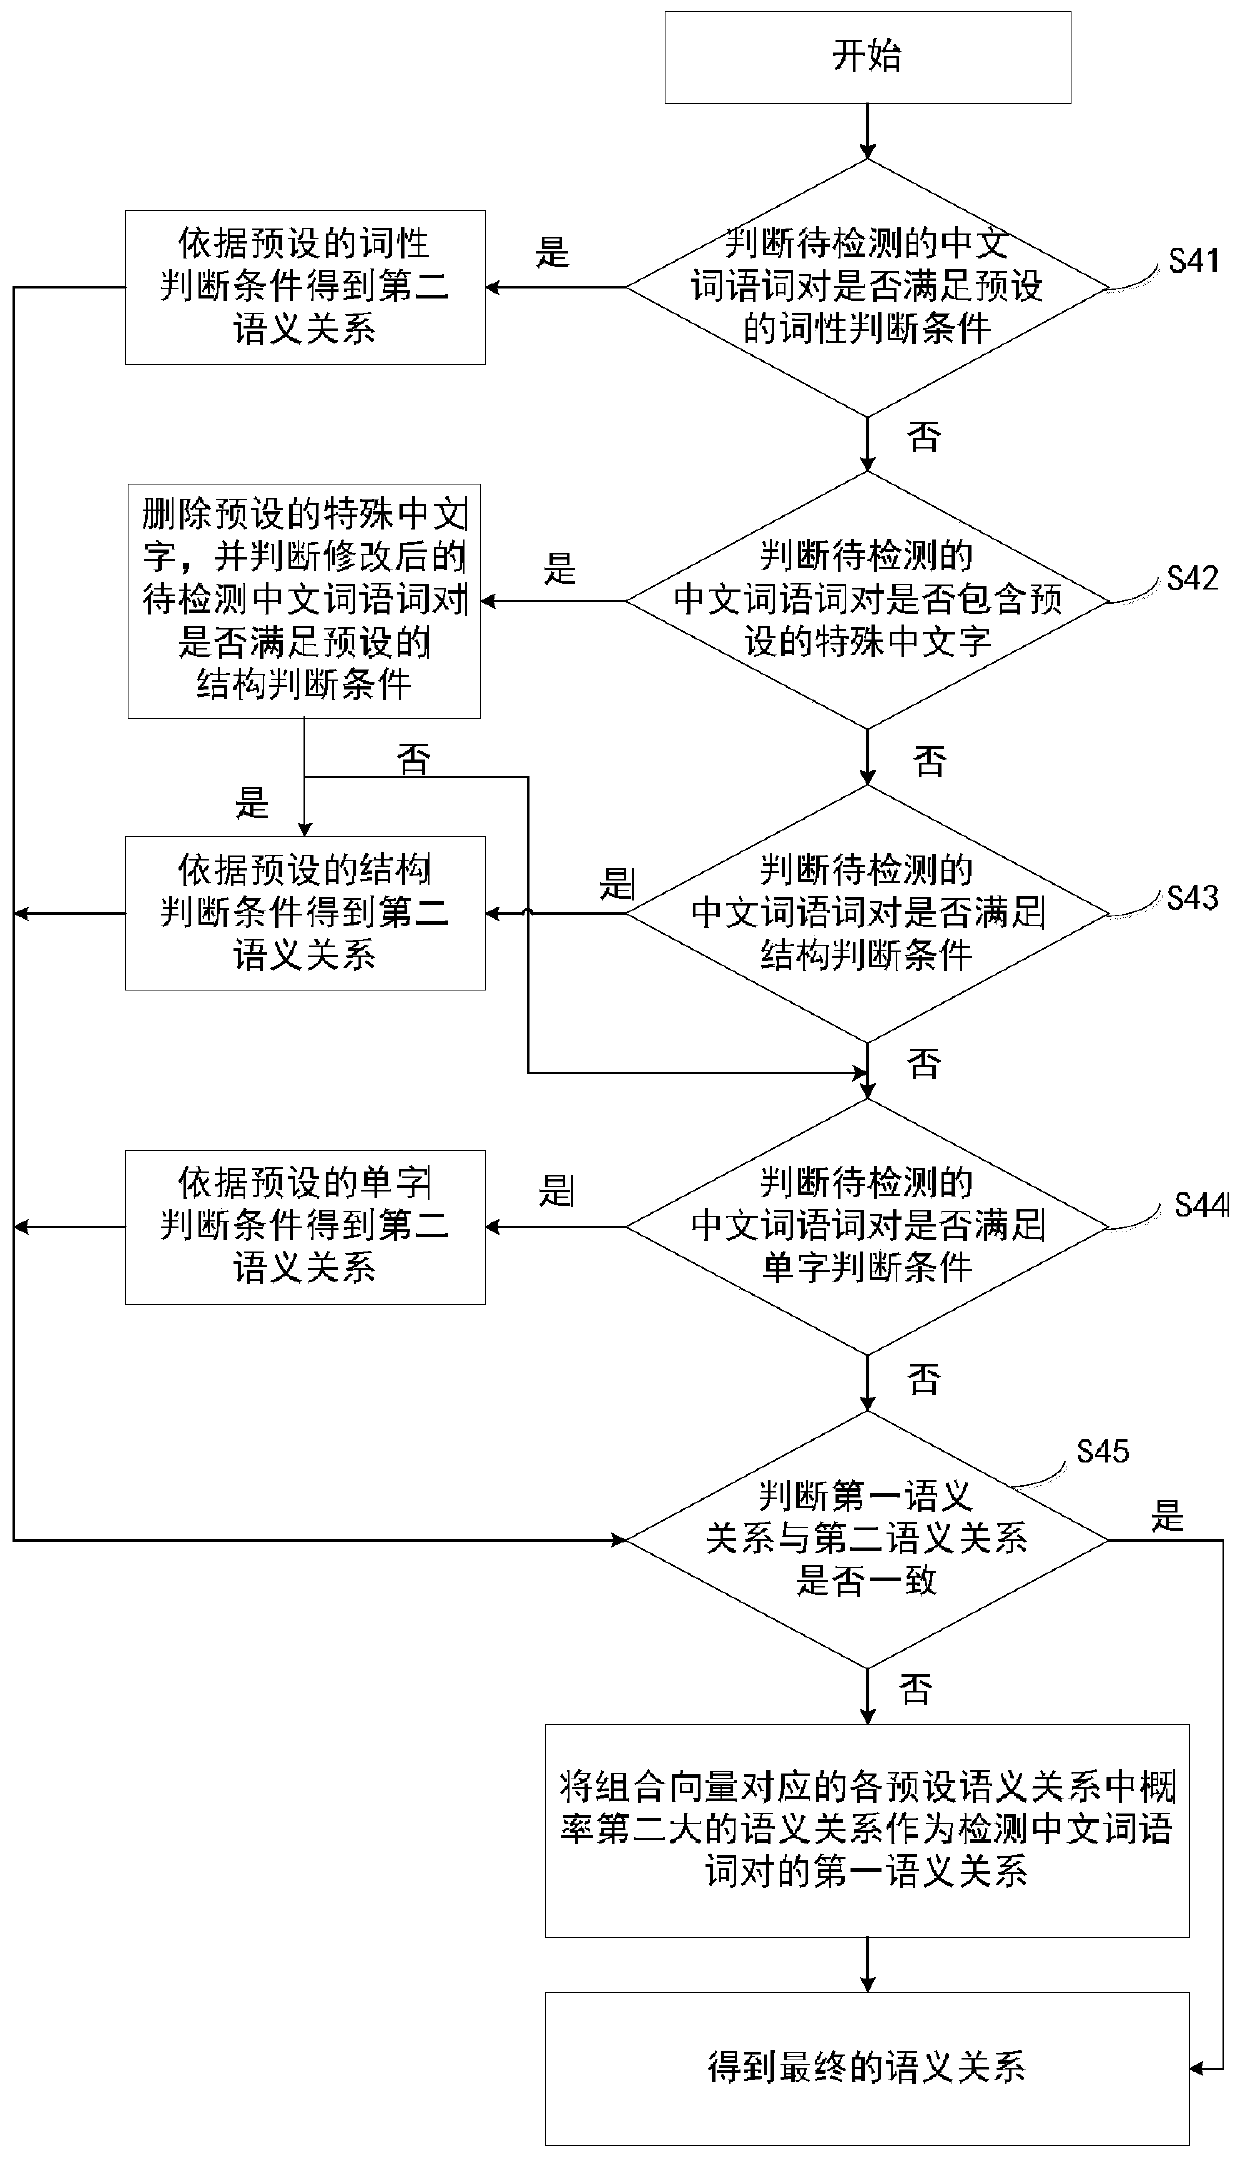 Chinese semantic relationship recognition method and device